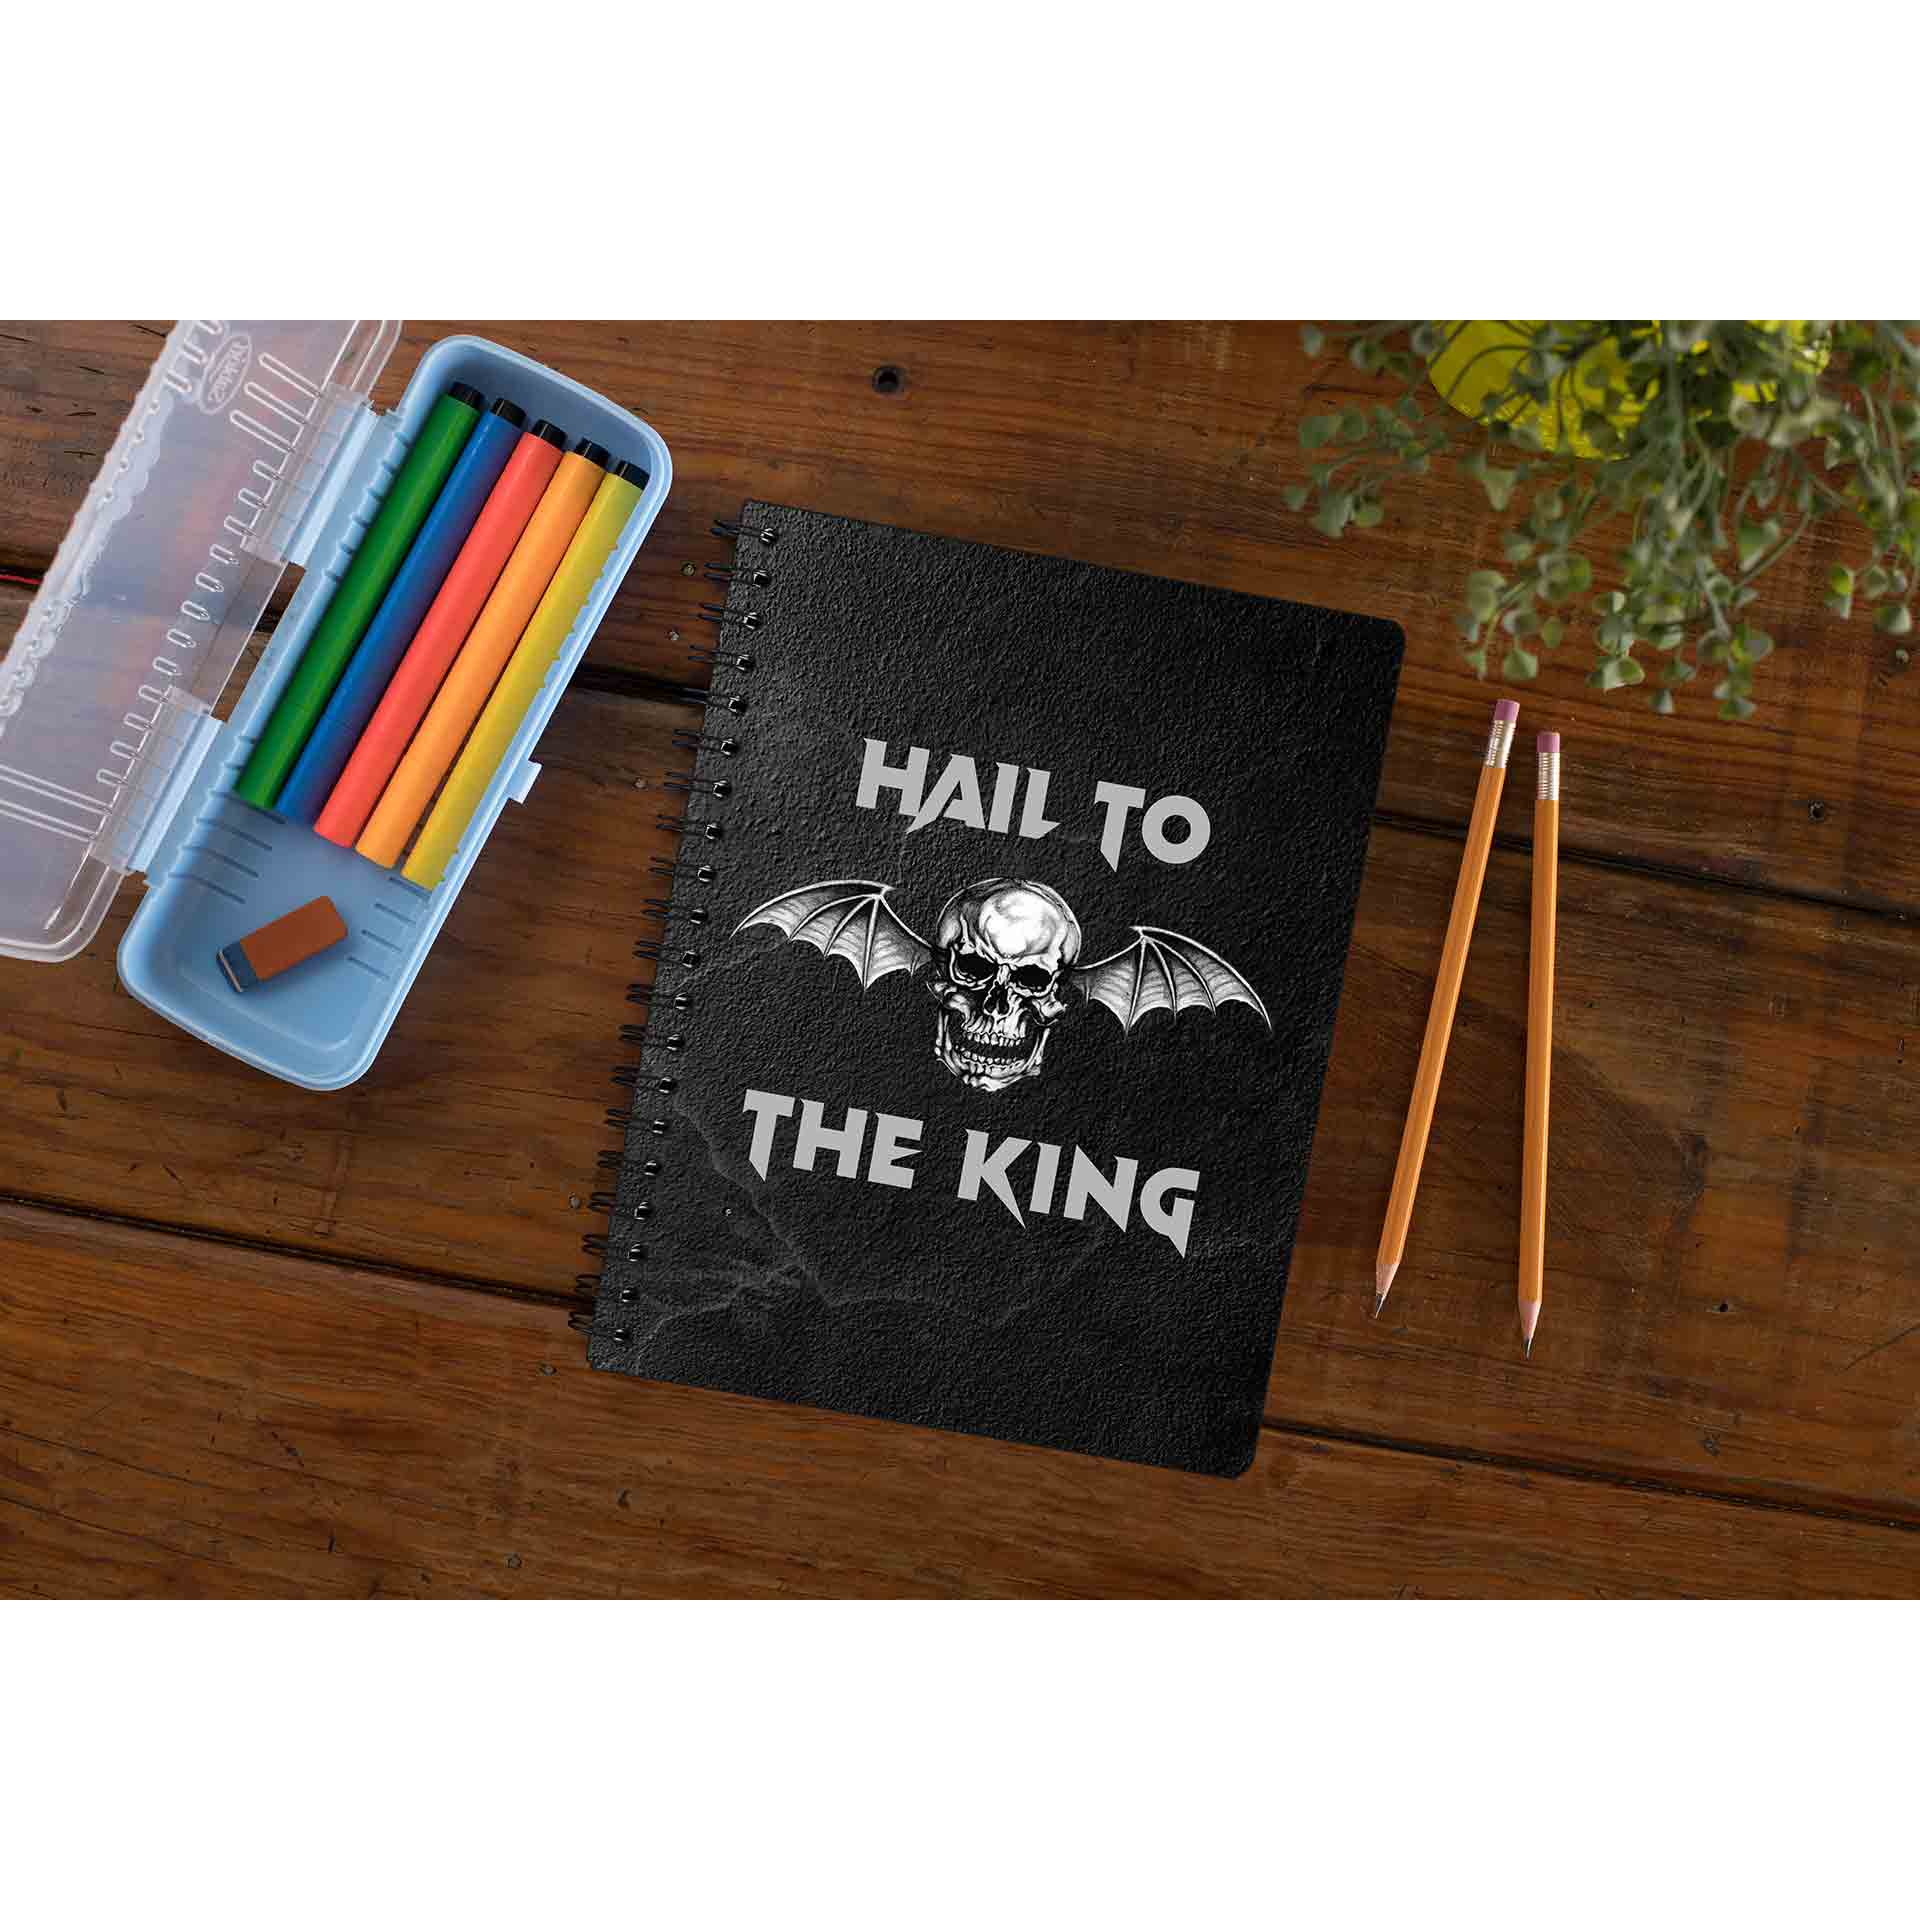 avenged sevenfold hail to the king notebook notepad diary buy online india the banyan tee tbt unruled